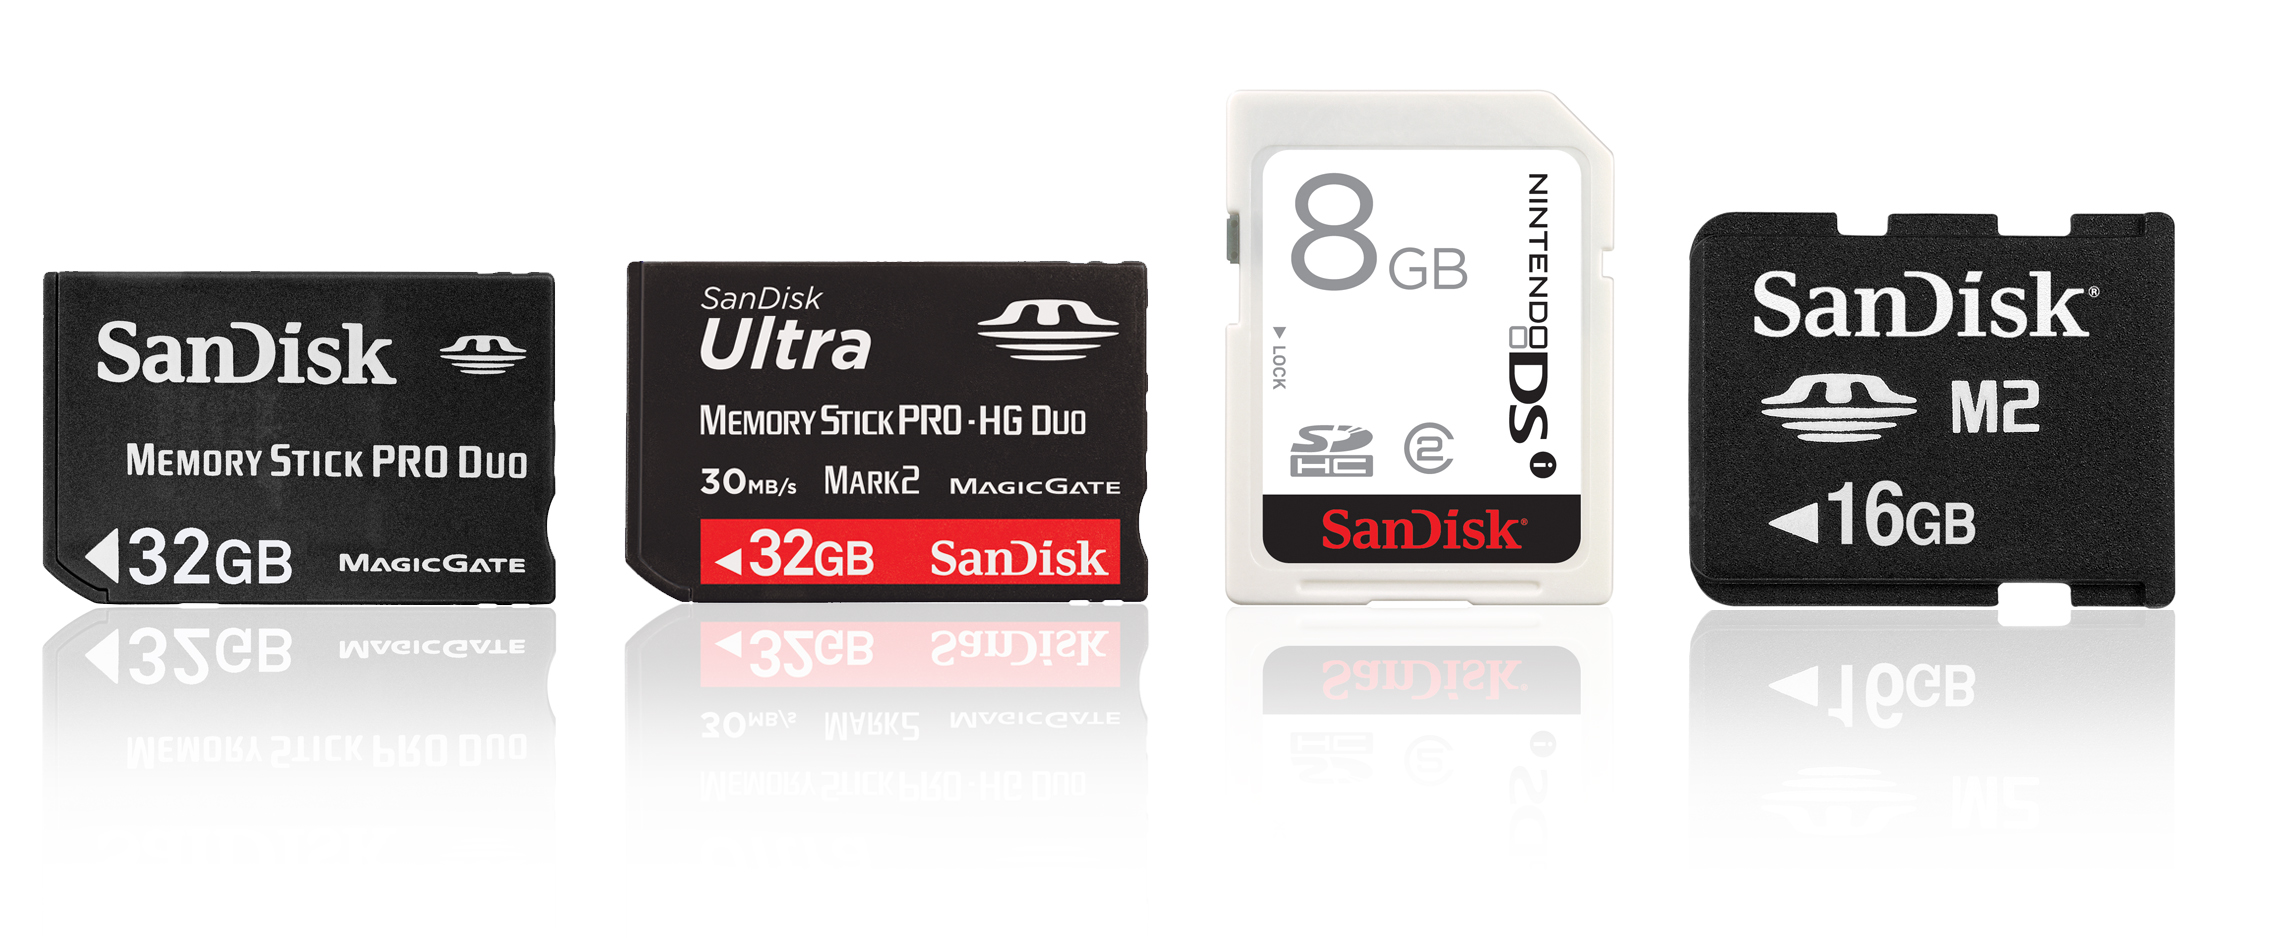 superficial plátano exterior SanDisk announces new 16GB memory card in time for Sony PSP Go release |  ZDNET